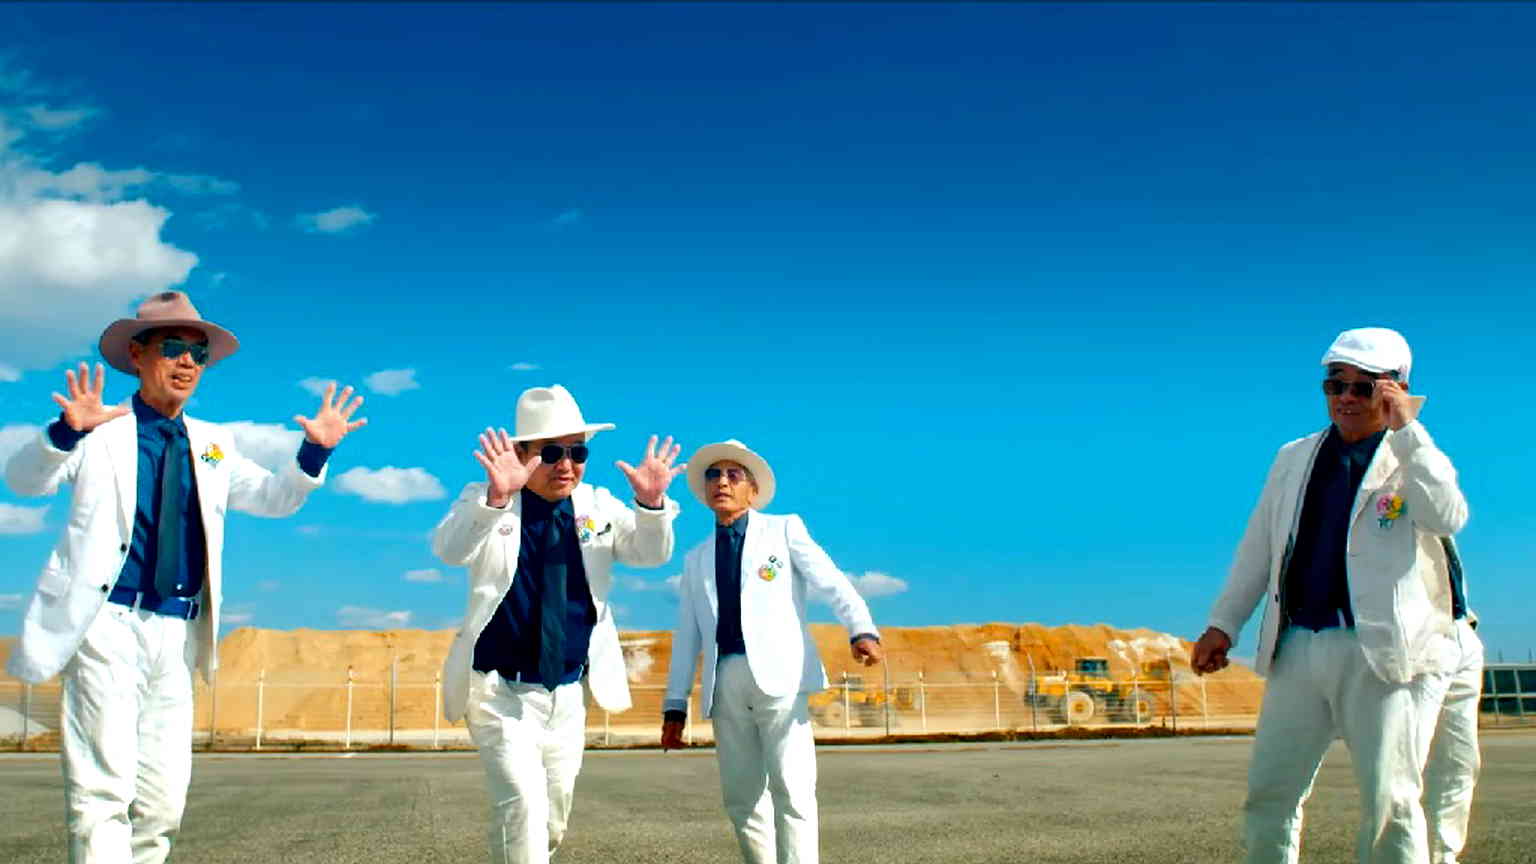 Meet the Japanese pop ‘boy’ band consisting of men all over the age of 65